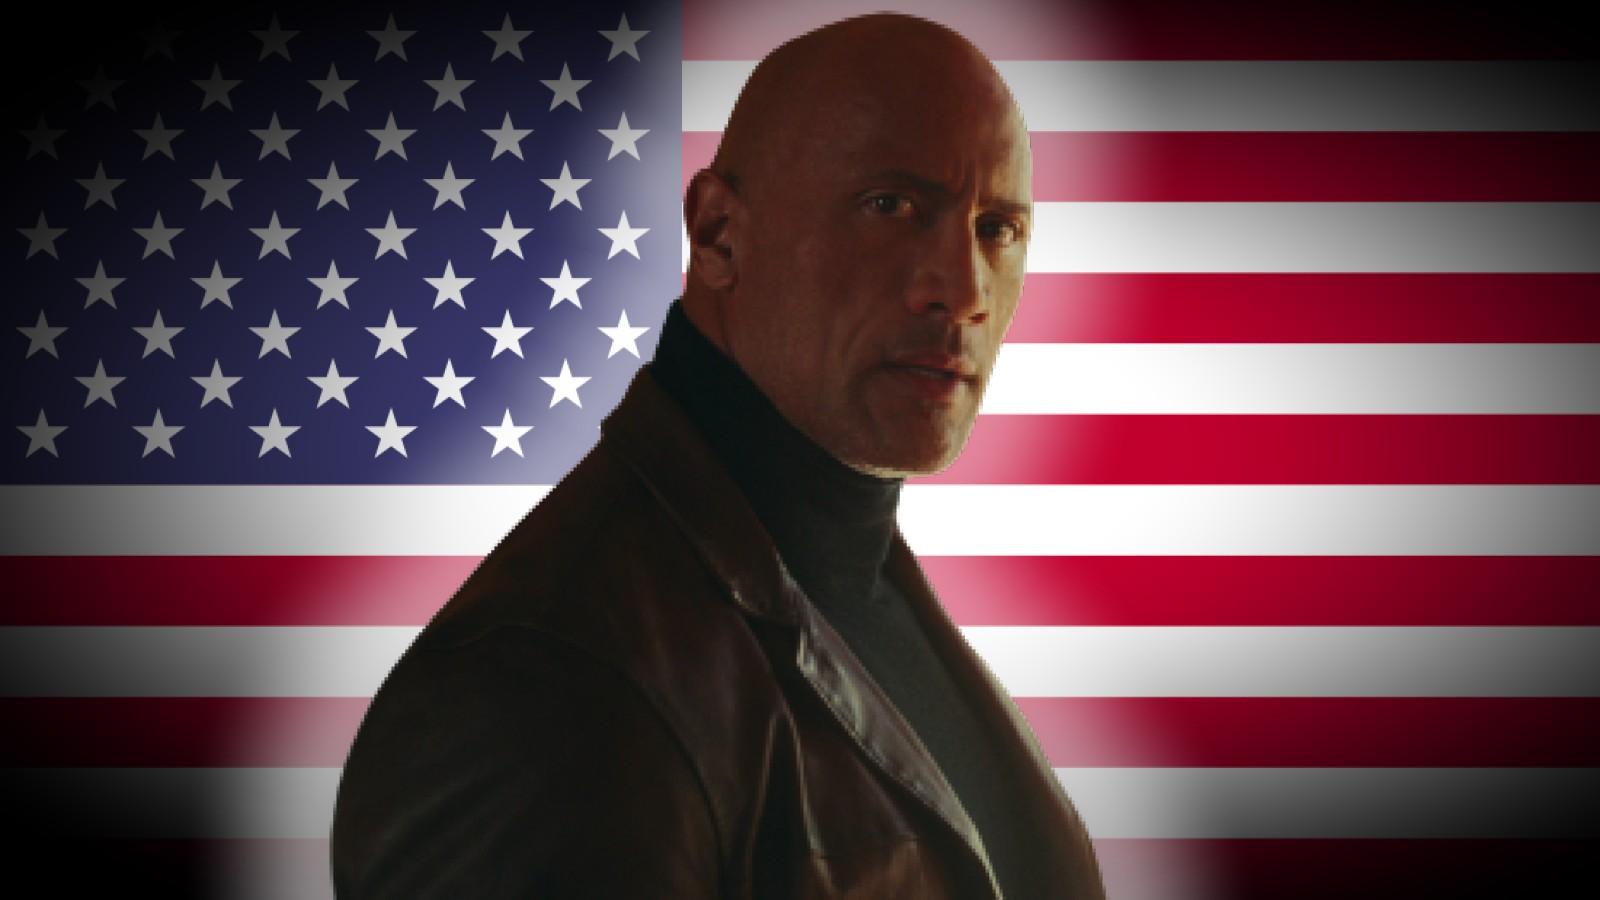 Dwayne Johnson in front of a US flag